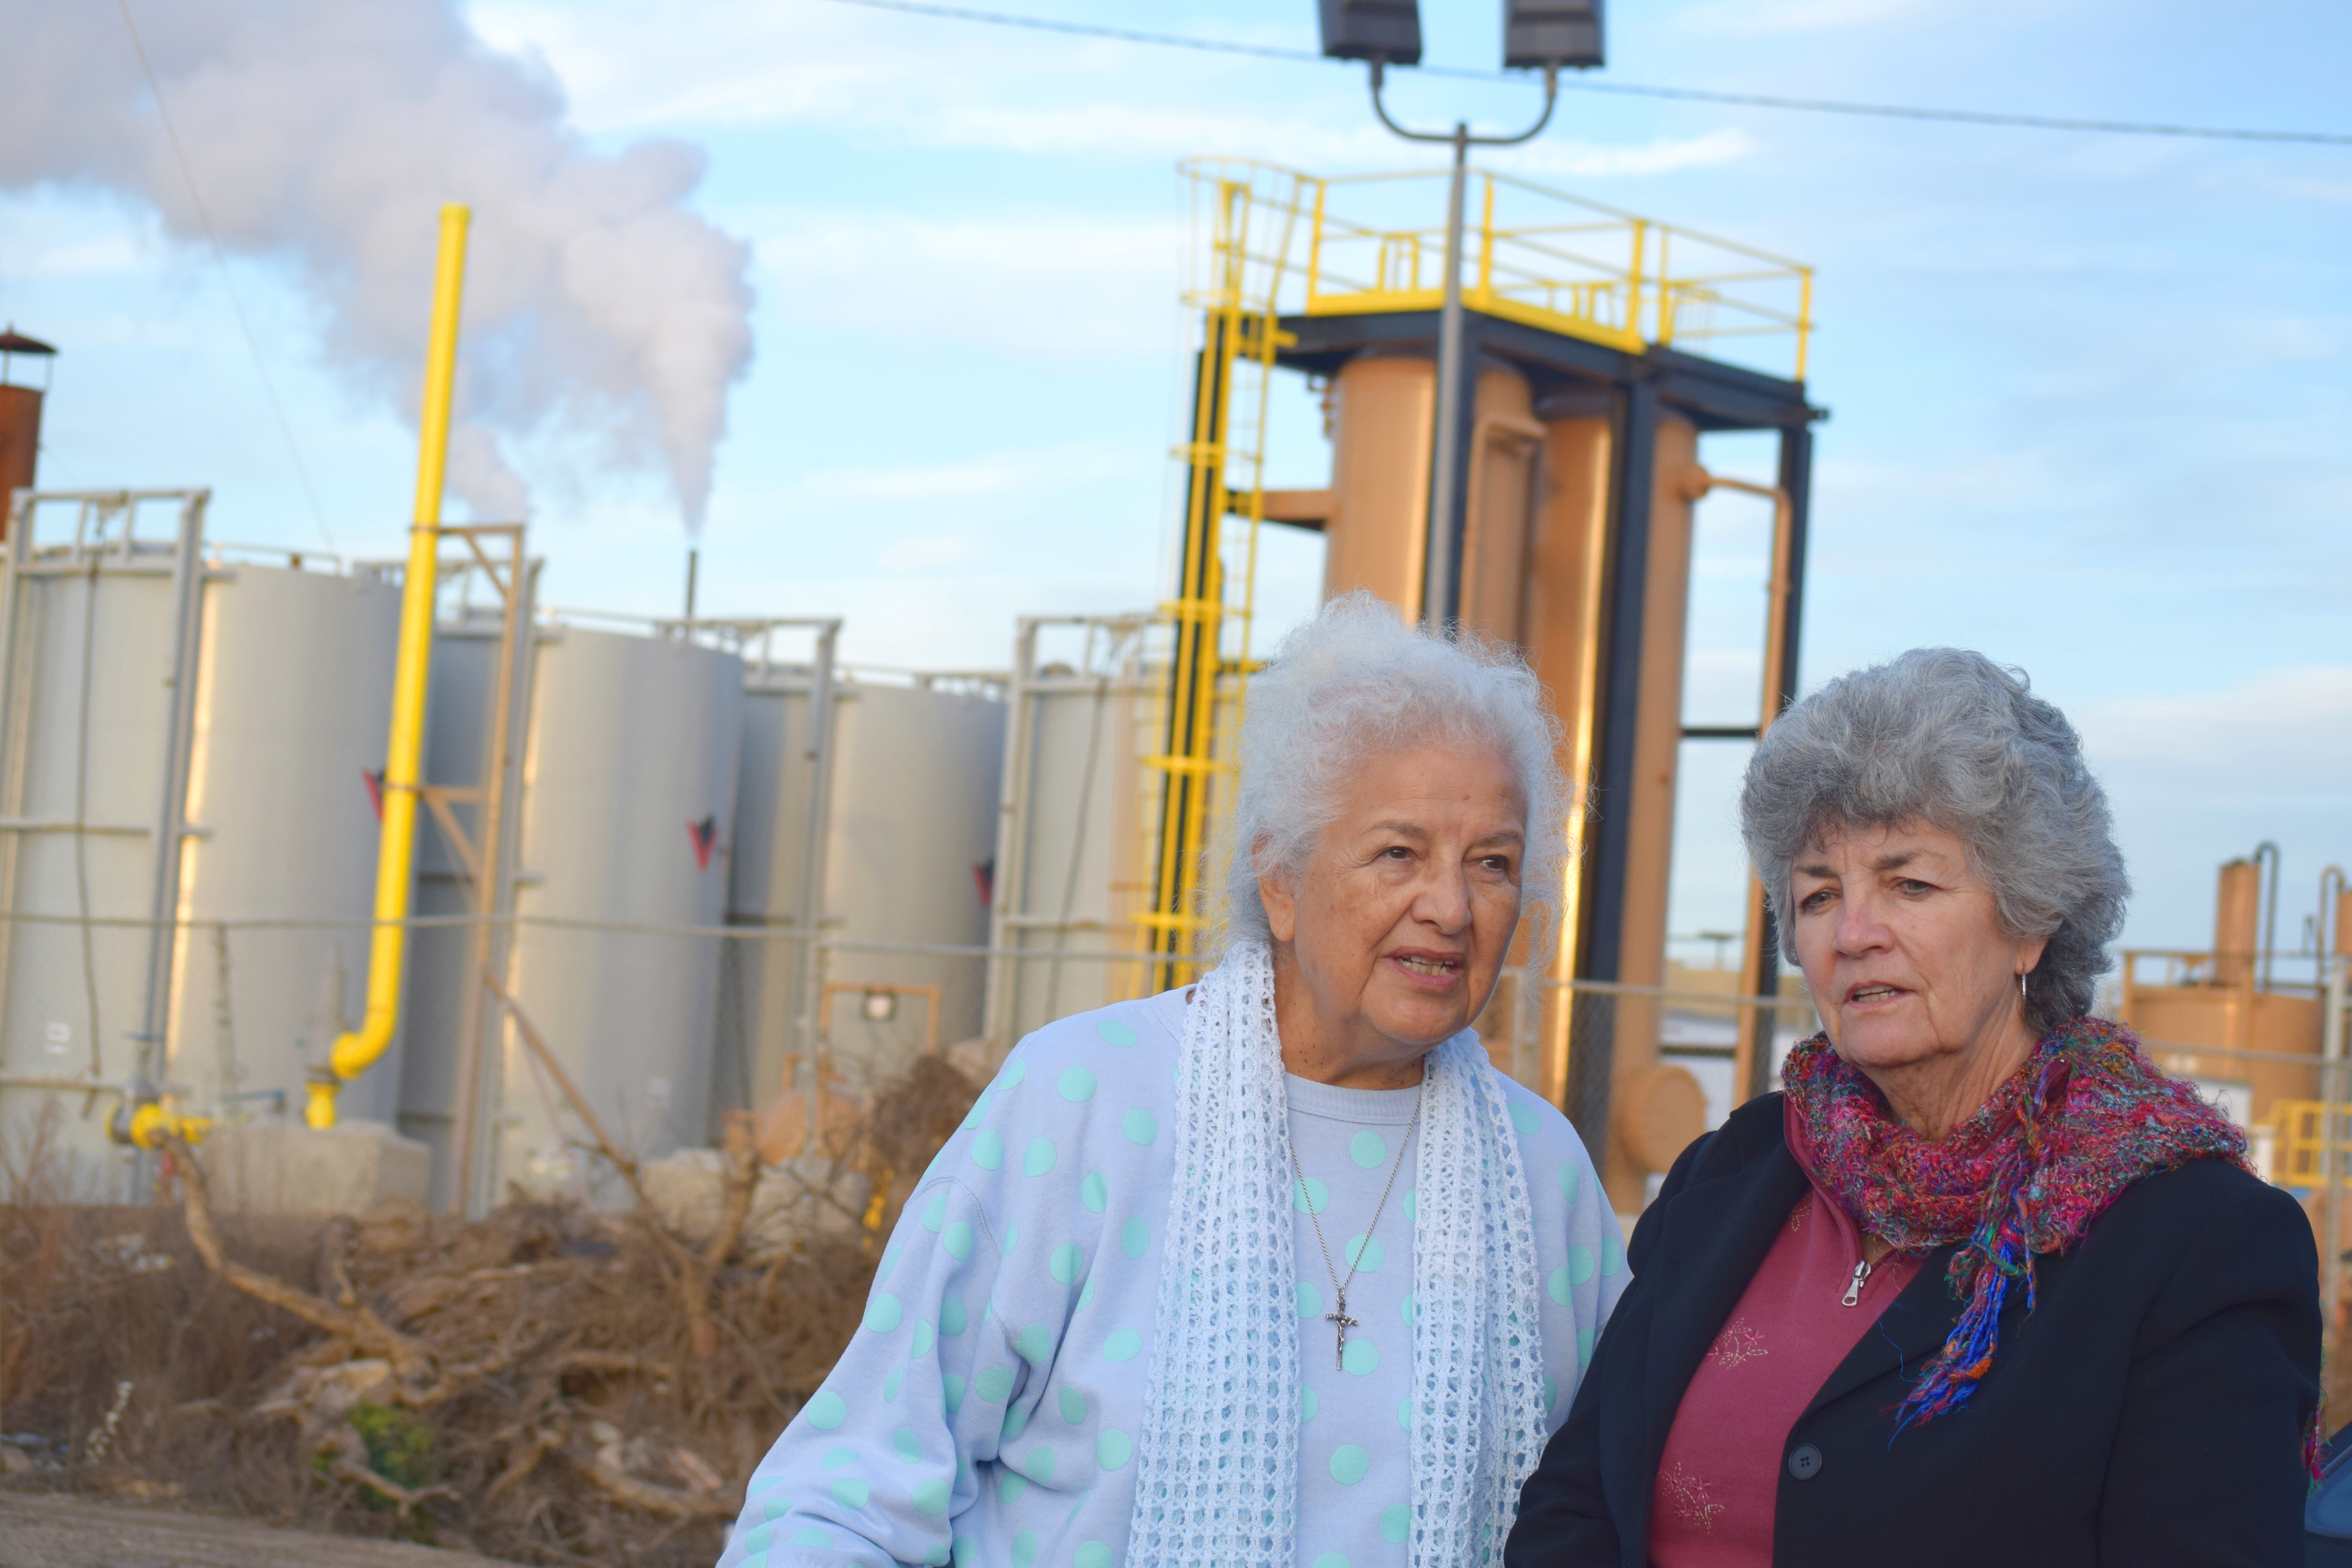 Activist Lupe Anguiano, left, and Councilwoman Carmen Ramirez stand near tanks of steam. (Photo by Elaine Fragosa)